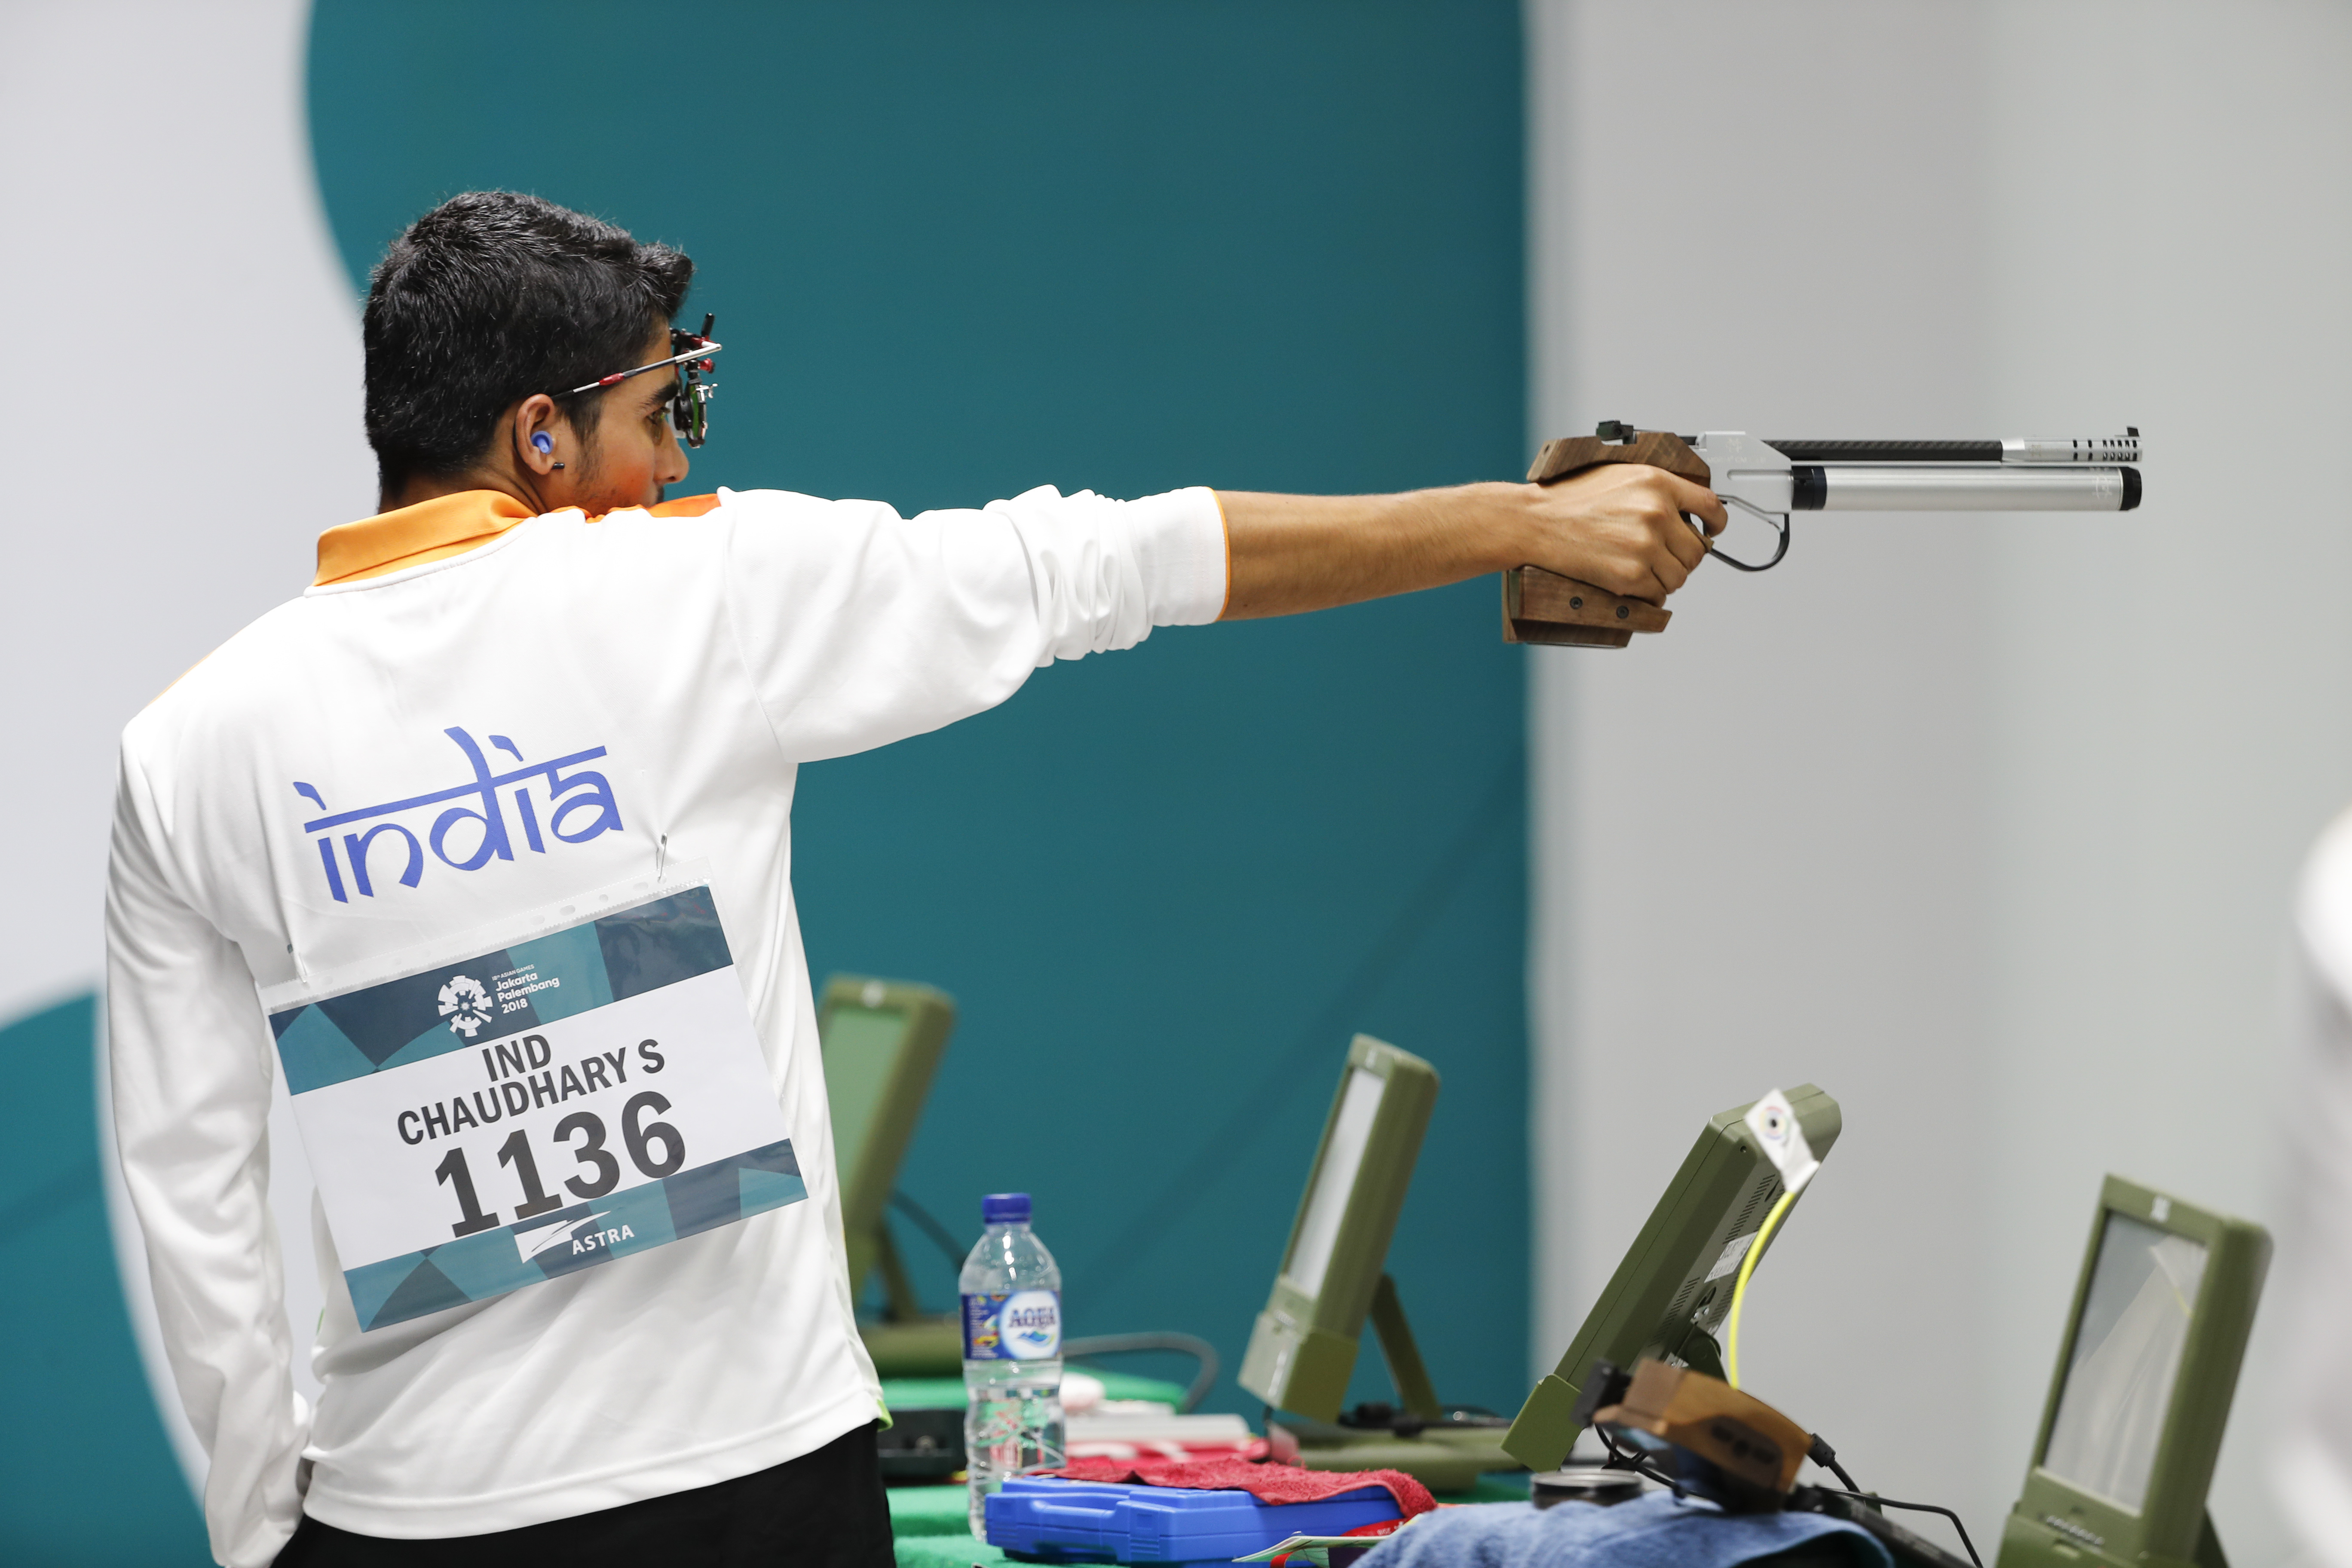 Saurabh Chaudhary takes aim in the final round of the 10m air pistol men's final shooting event at the 18th Asian Games in Palembang, Indonesia.